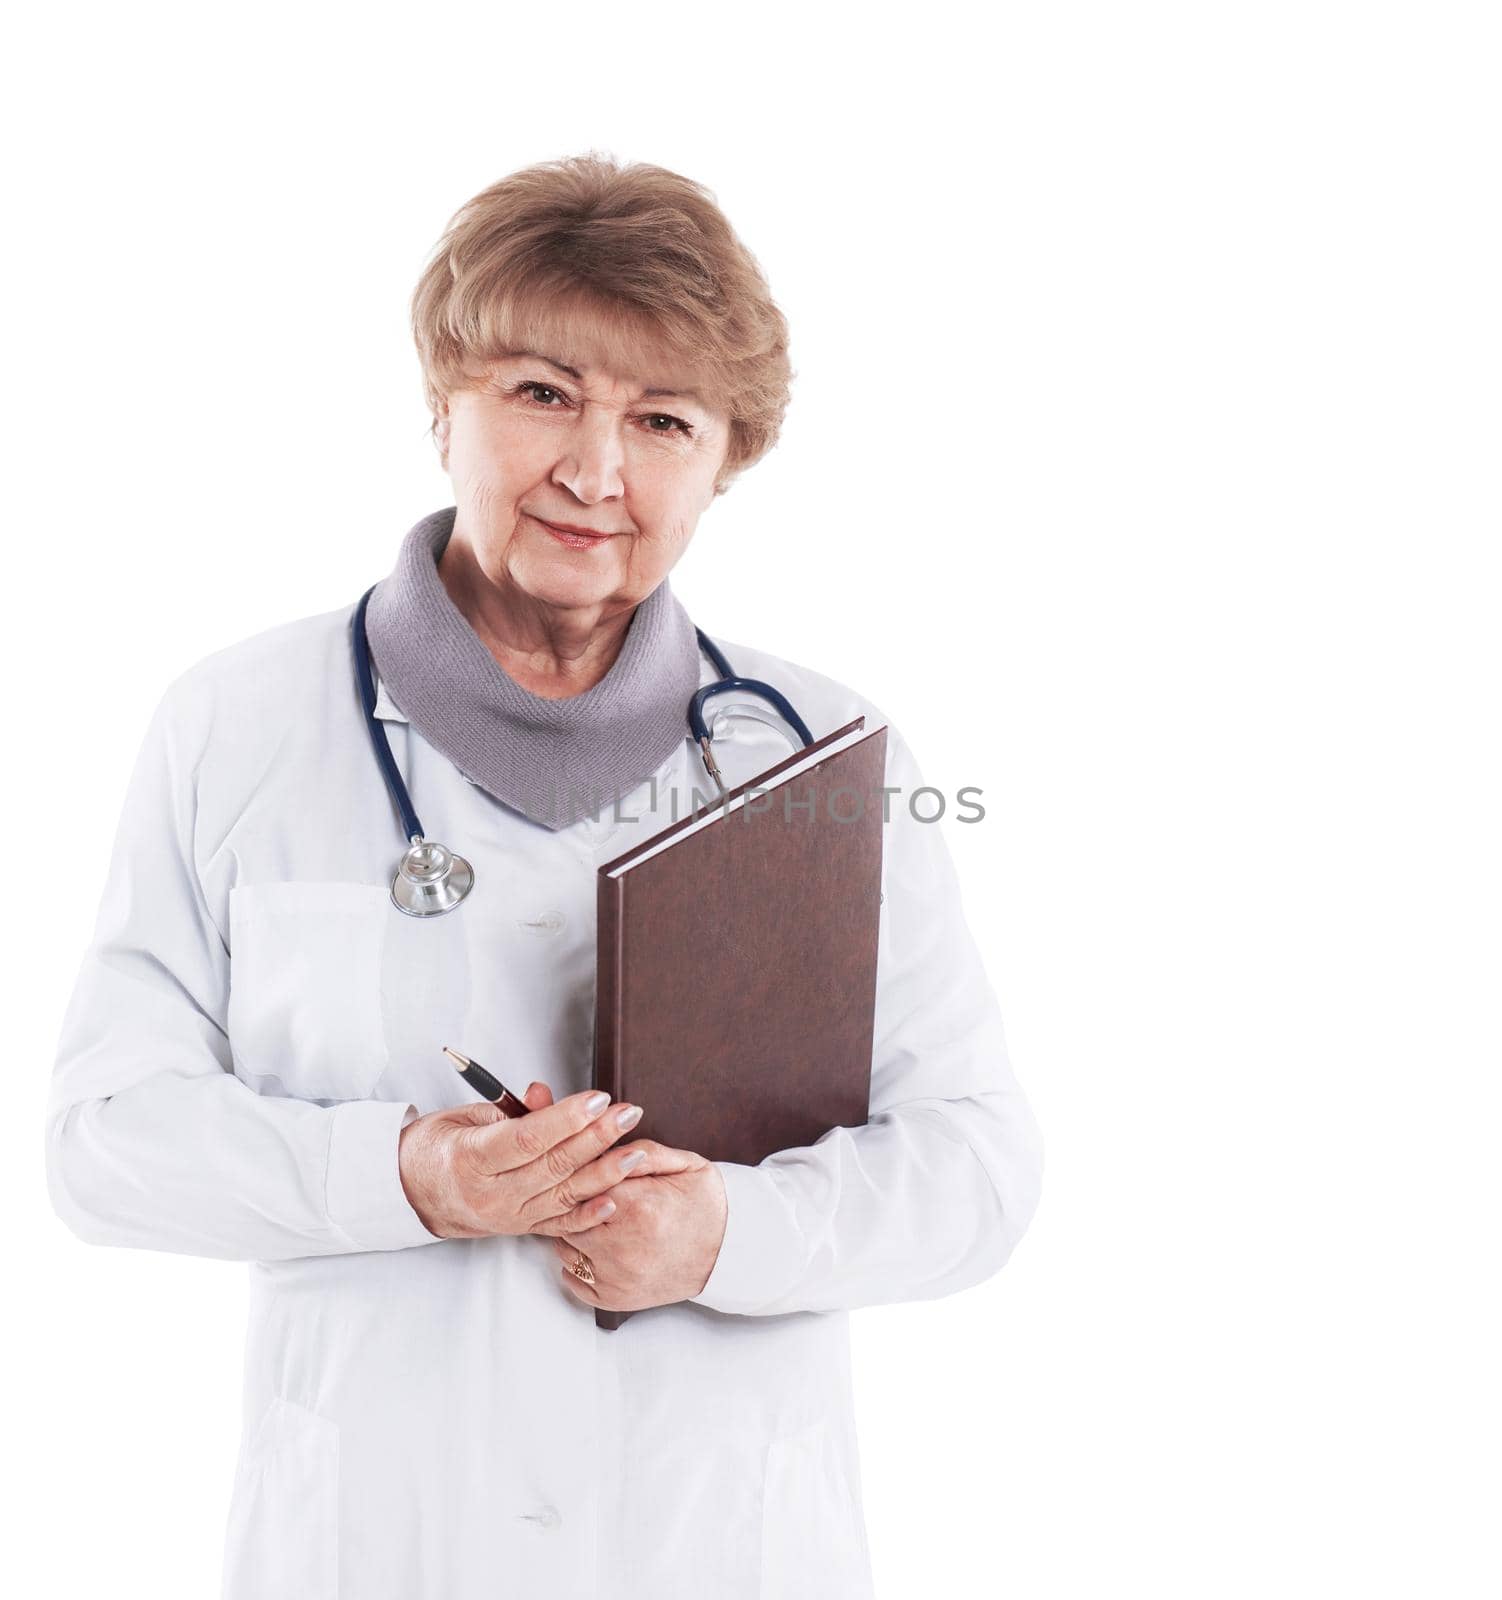 Smiling medical woman doctor. Isolated over white background by SmartPhotoLab